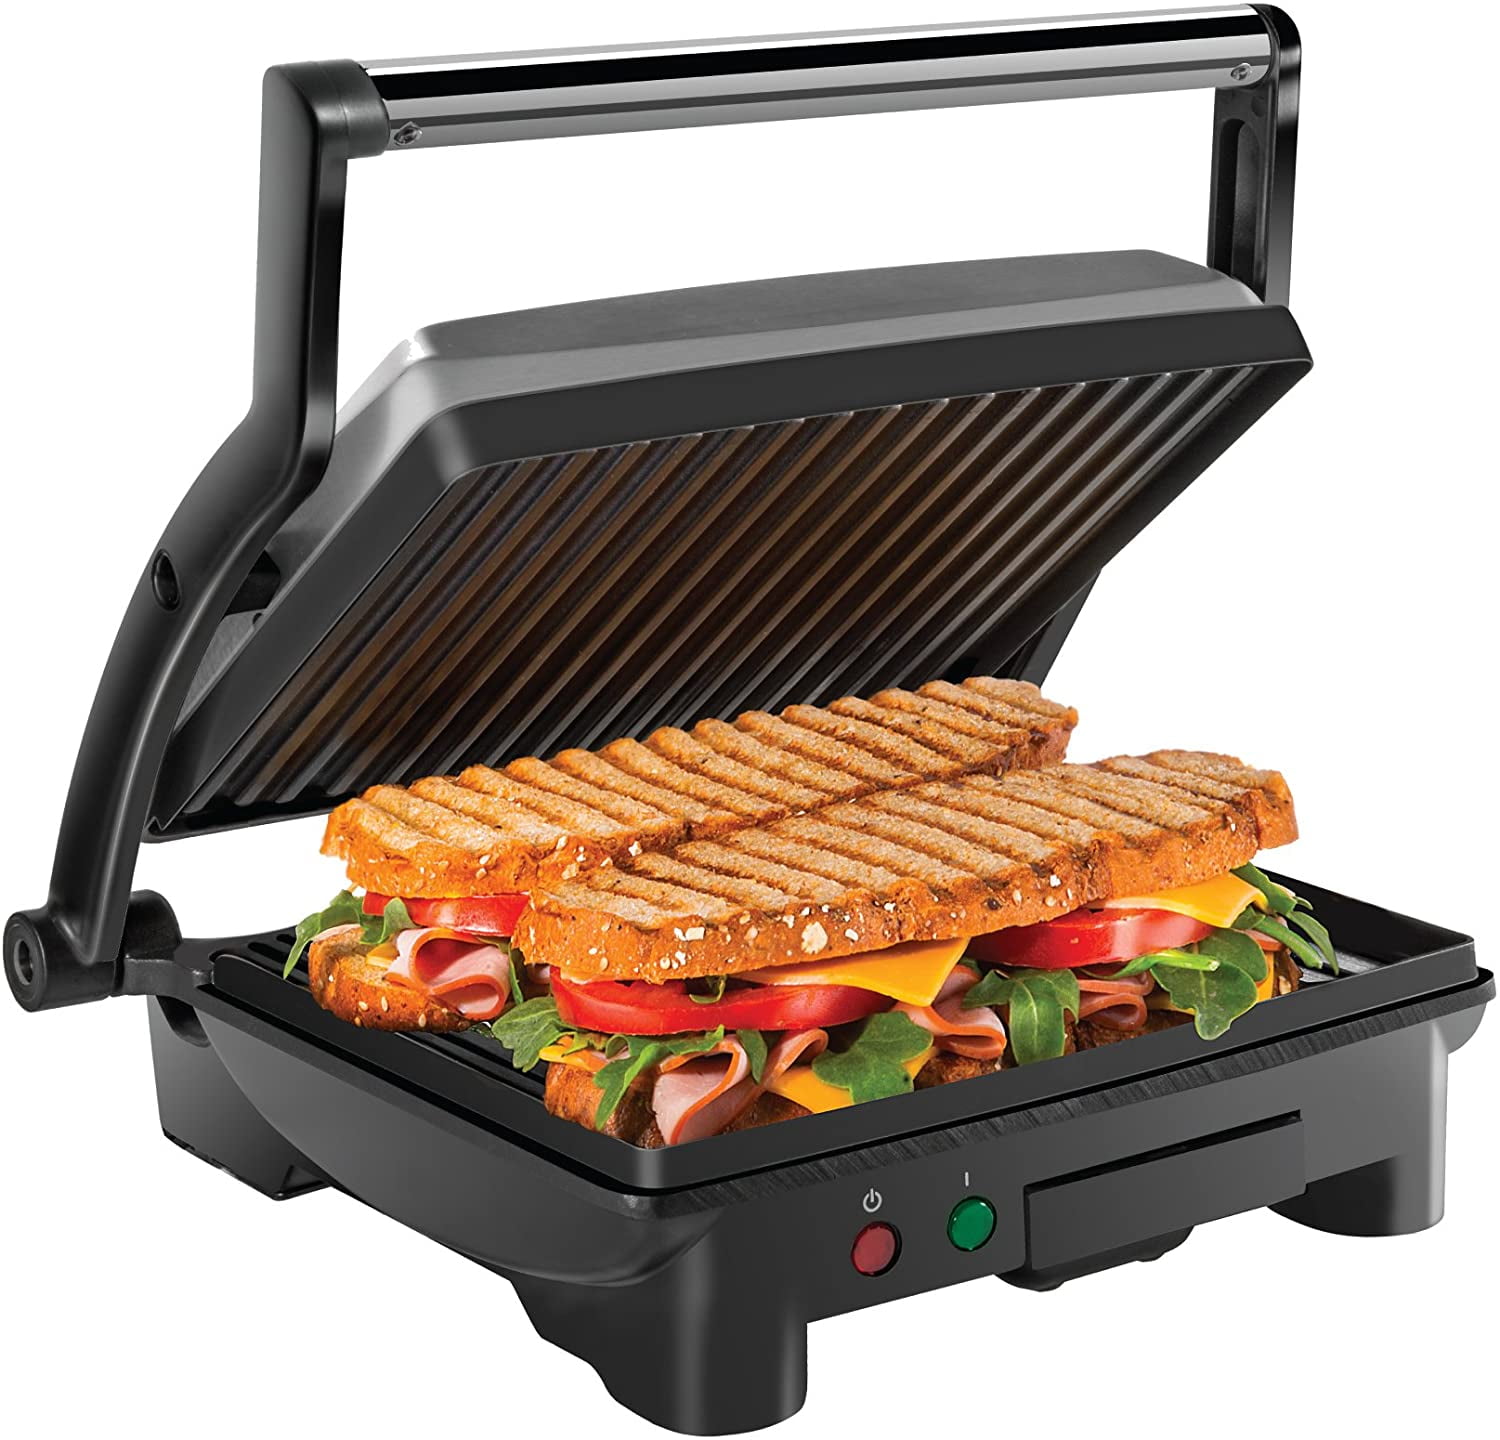 Chefman 3-in-1 Electric Panini Press & Grill, 4-Slice Non-Stick Press,  Opens Flat for Grill - Stainless Steel, New